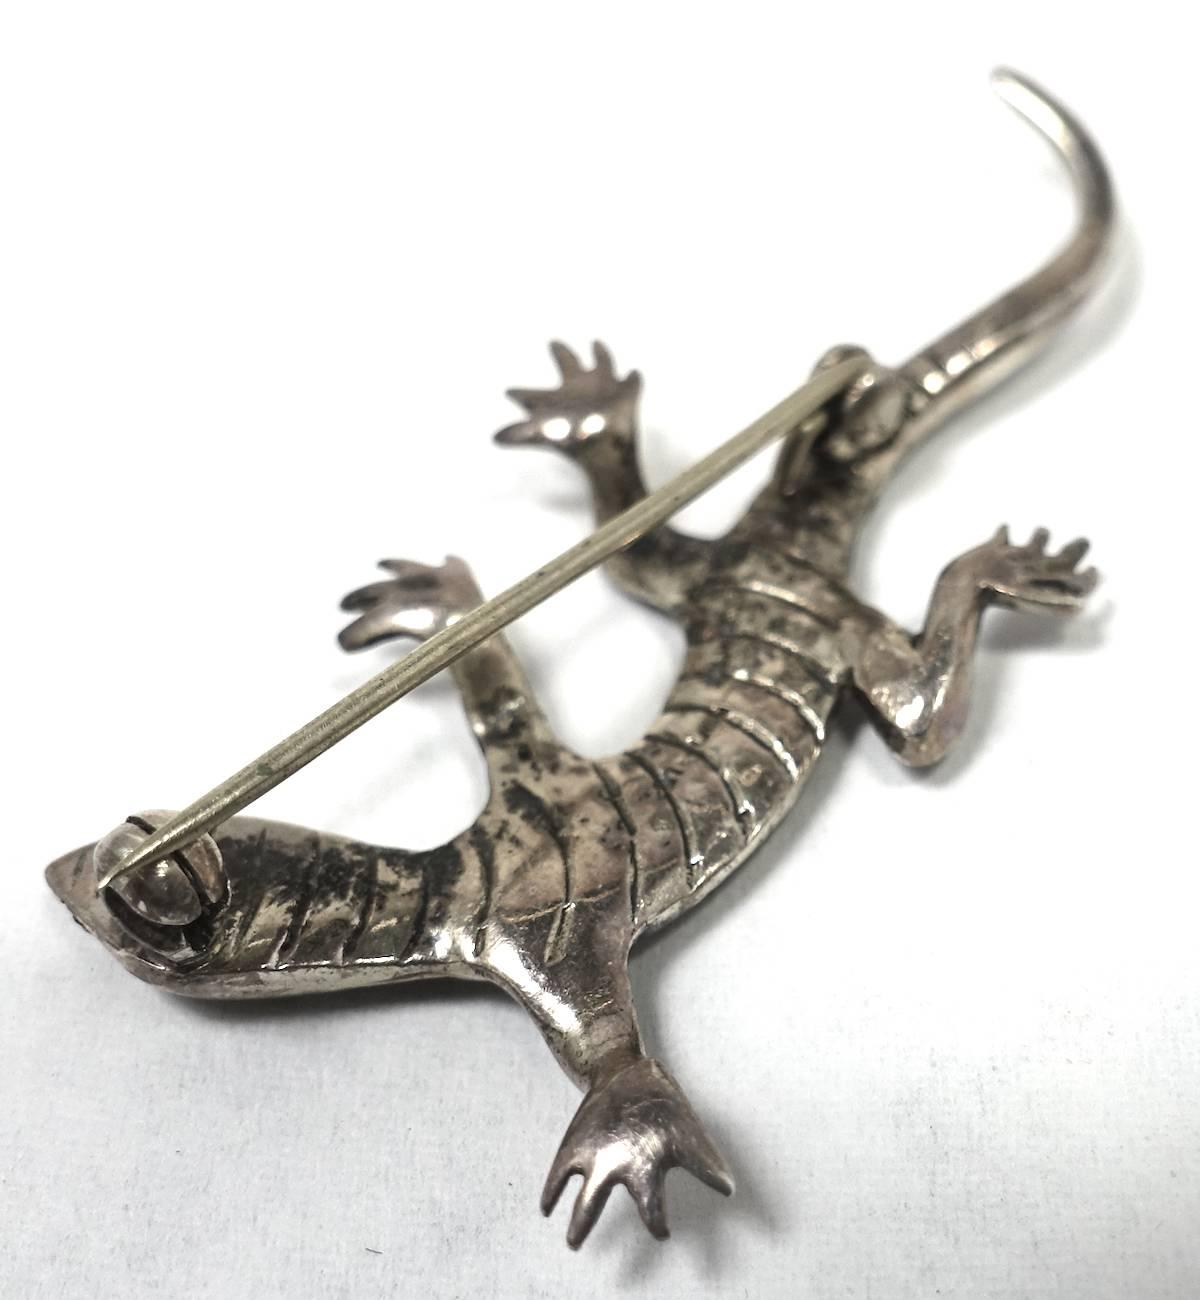 This vintage brooch features an alligator with marcasites in a sterling silver setting.  This brooch measures 1-3/4” x 1” and is in excellent condition.